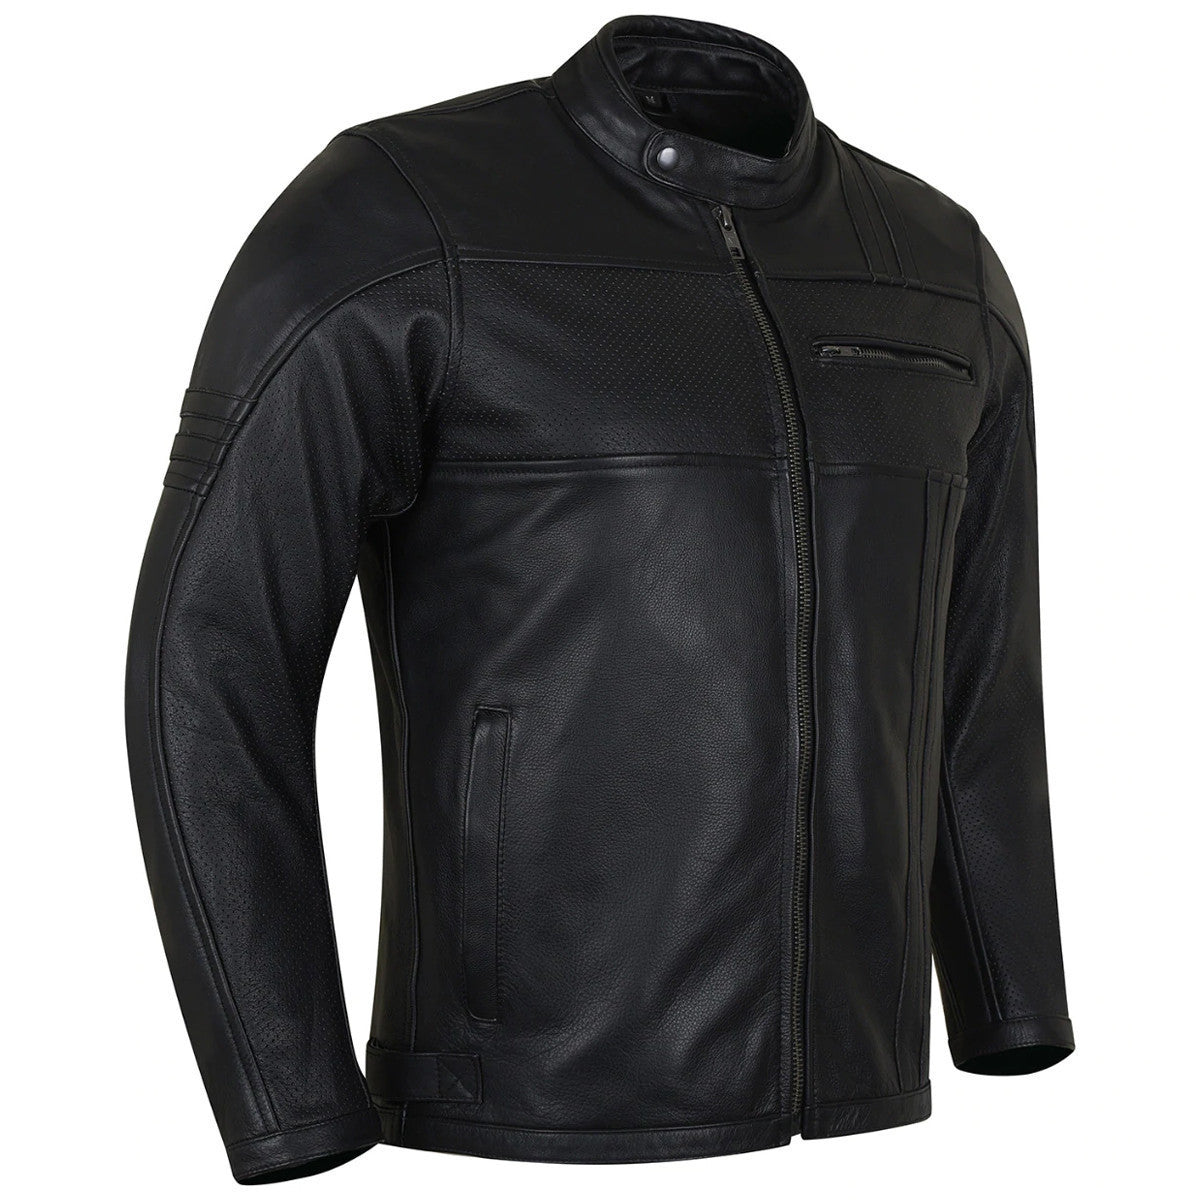 Vance Leather HMM532 Men's Commuter Cafe Racer Motorcycle Leather Jacket with Armor - side